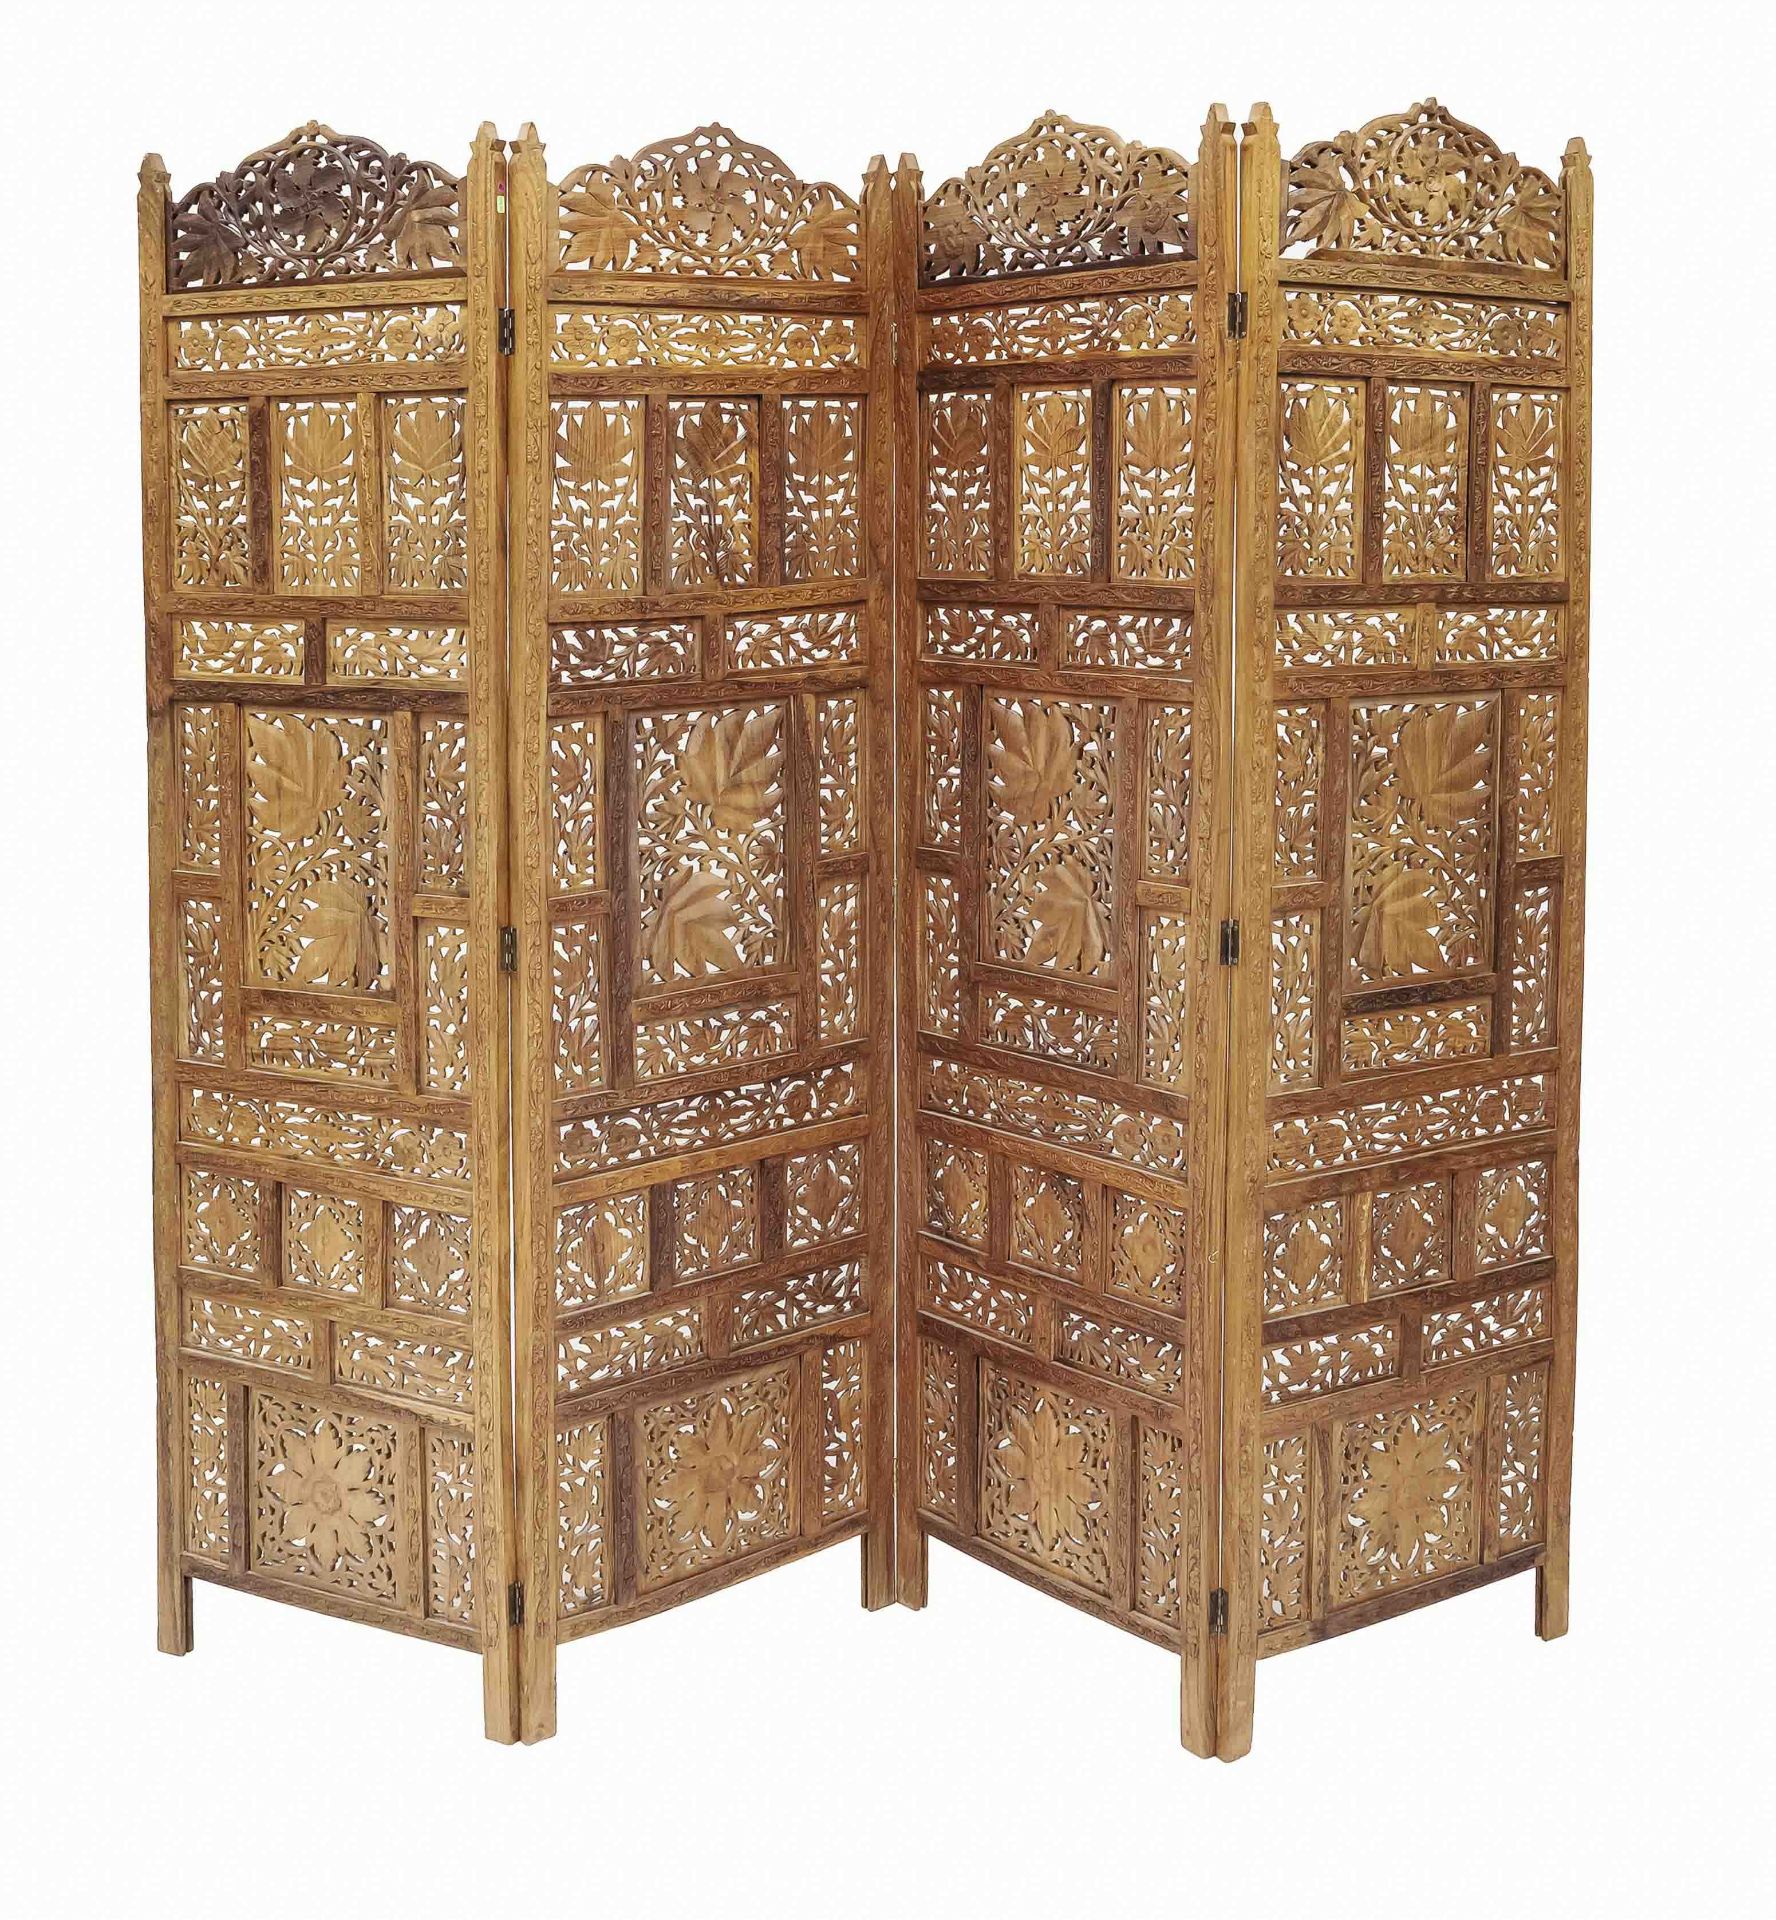 4-part folding screen PARAVENT, Orient, carved wood with numerous openwork floral decorations, h